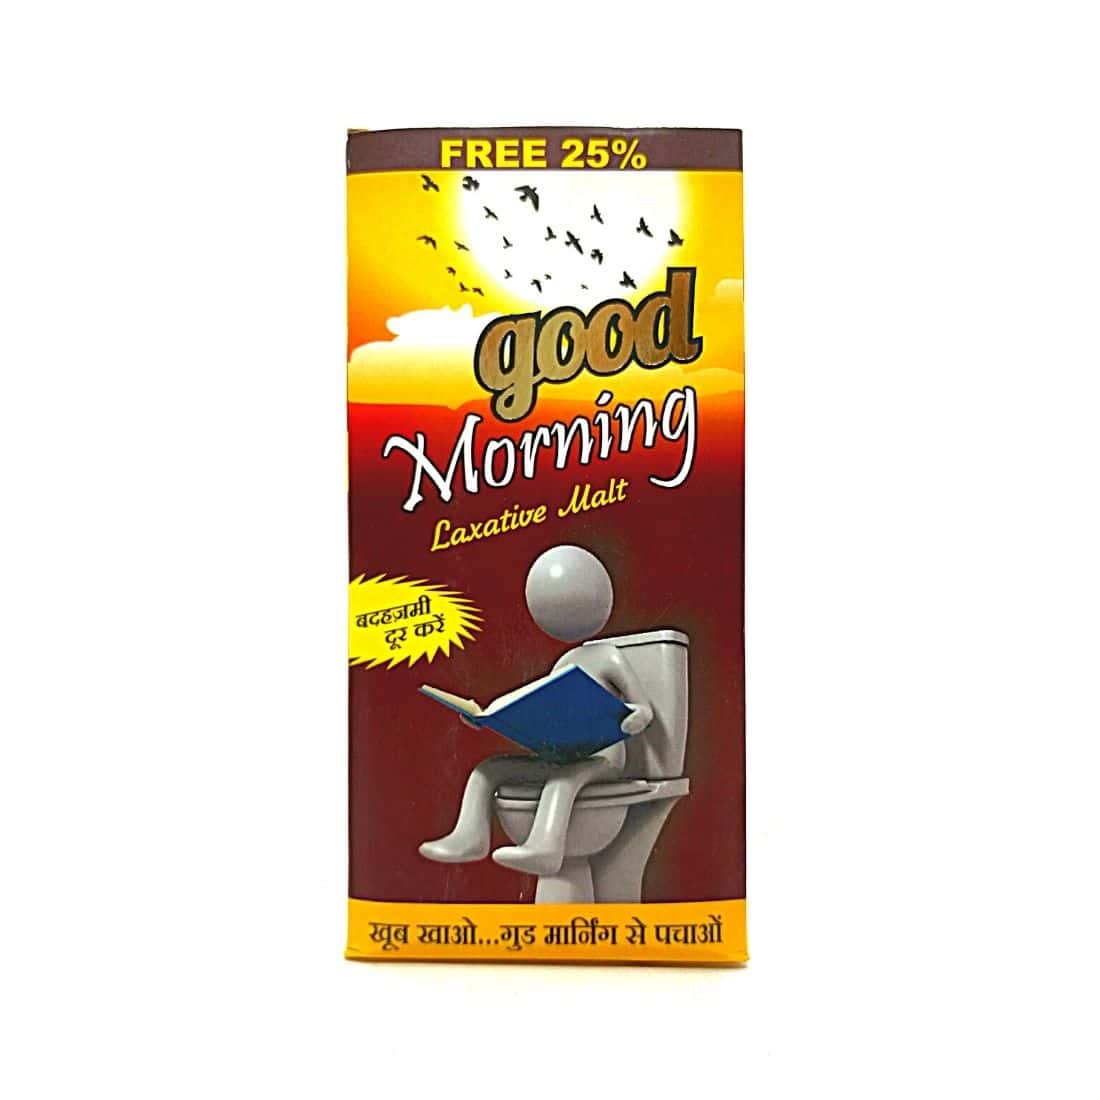 Good Morning Malt Natural Laxative Is An Effective Formulation In Relieving Chronic Constipation